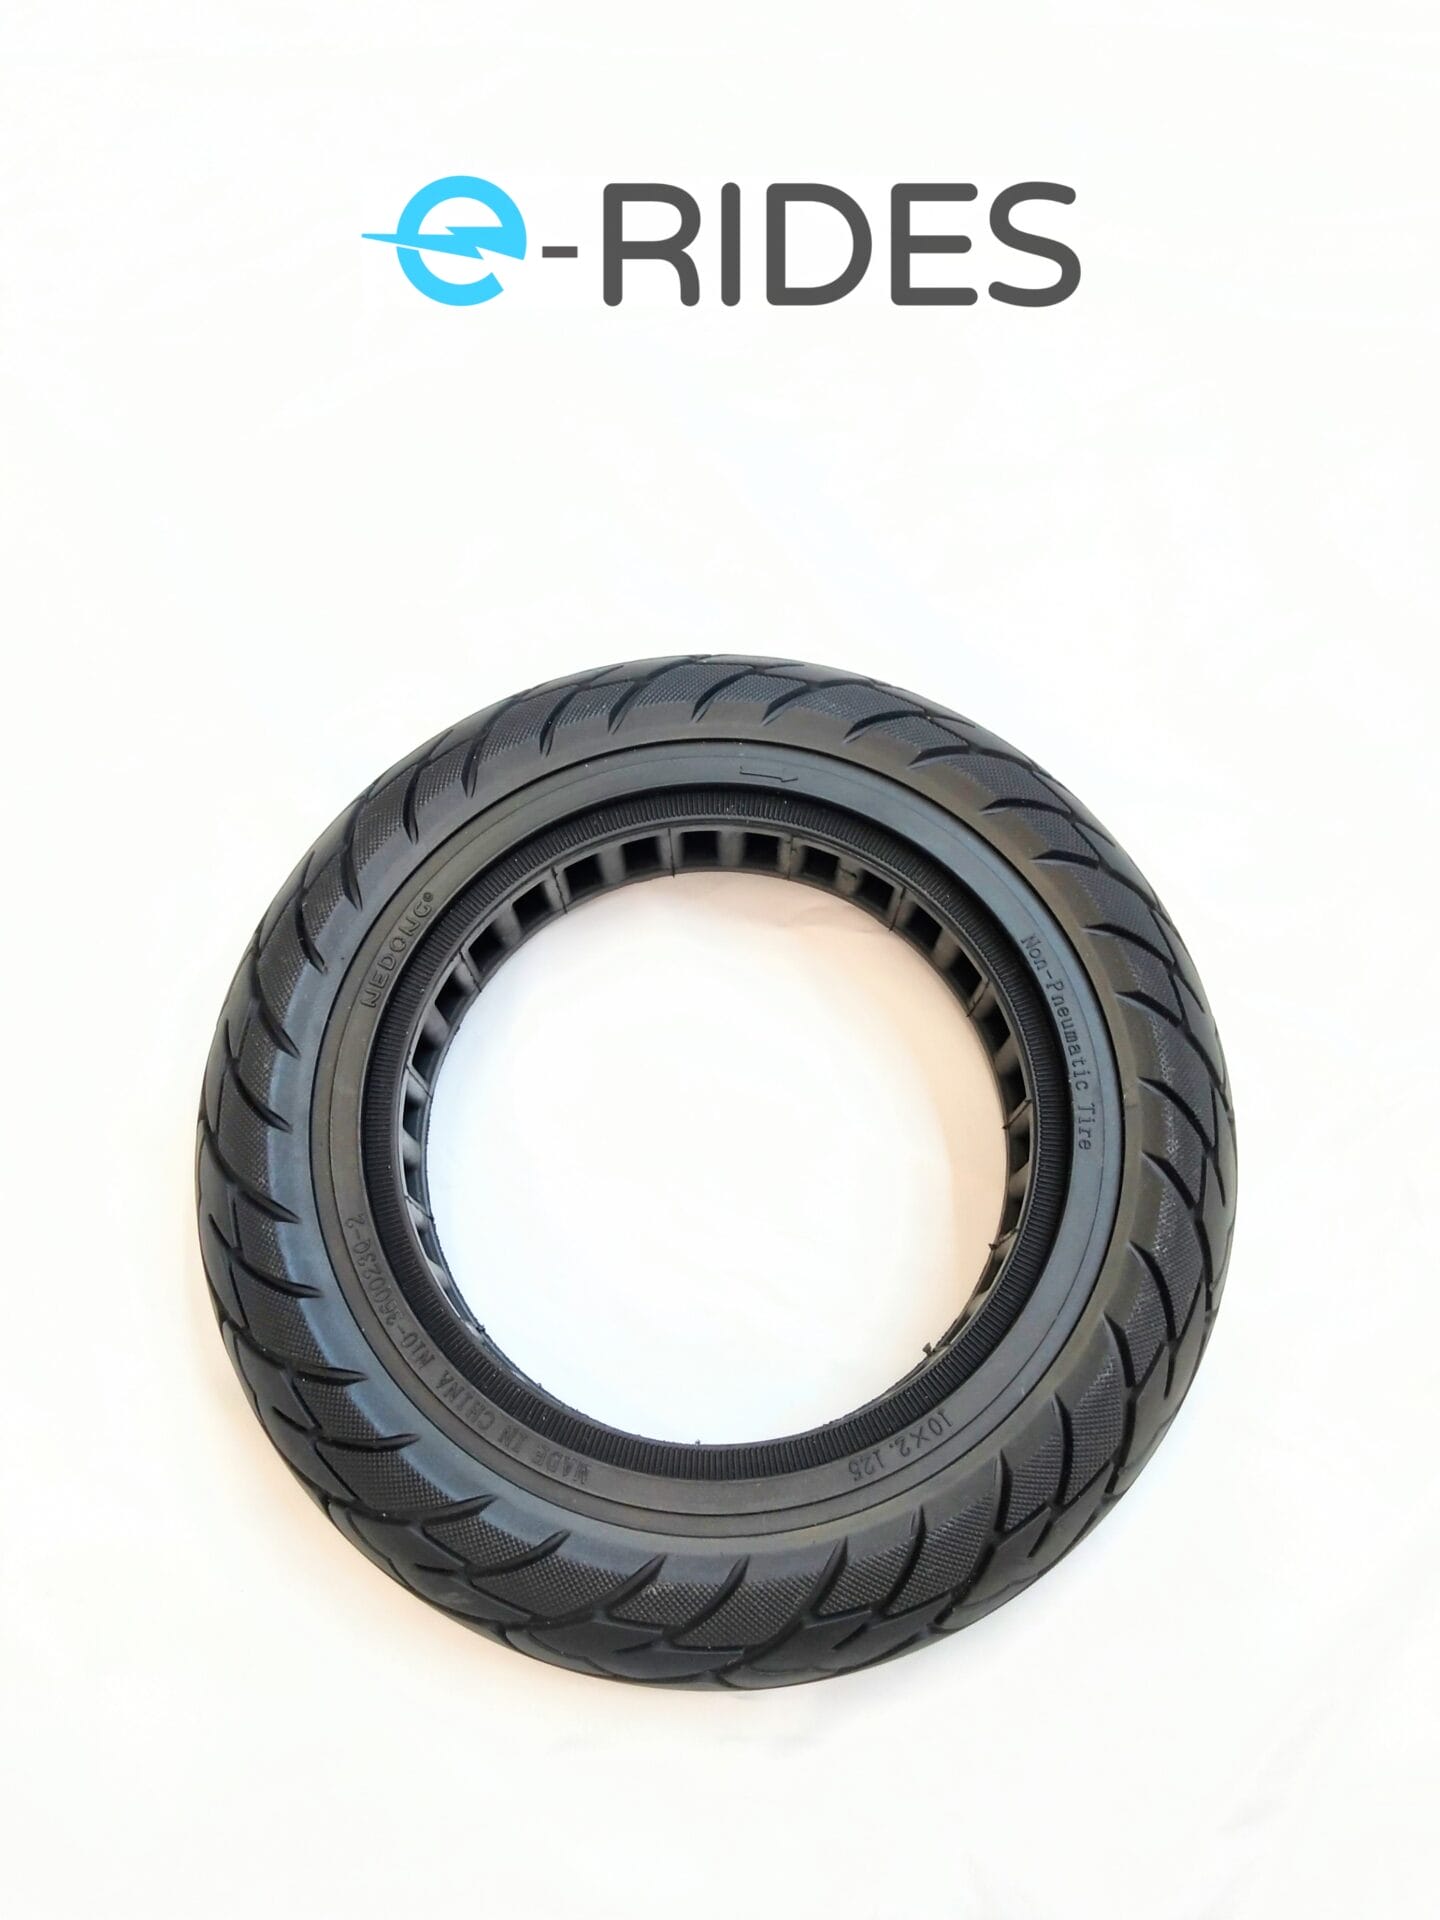 10 x 2.125 Solid Tyre Non-Pneumatic Anti Puncture for electric scooter